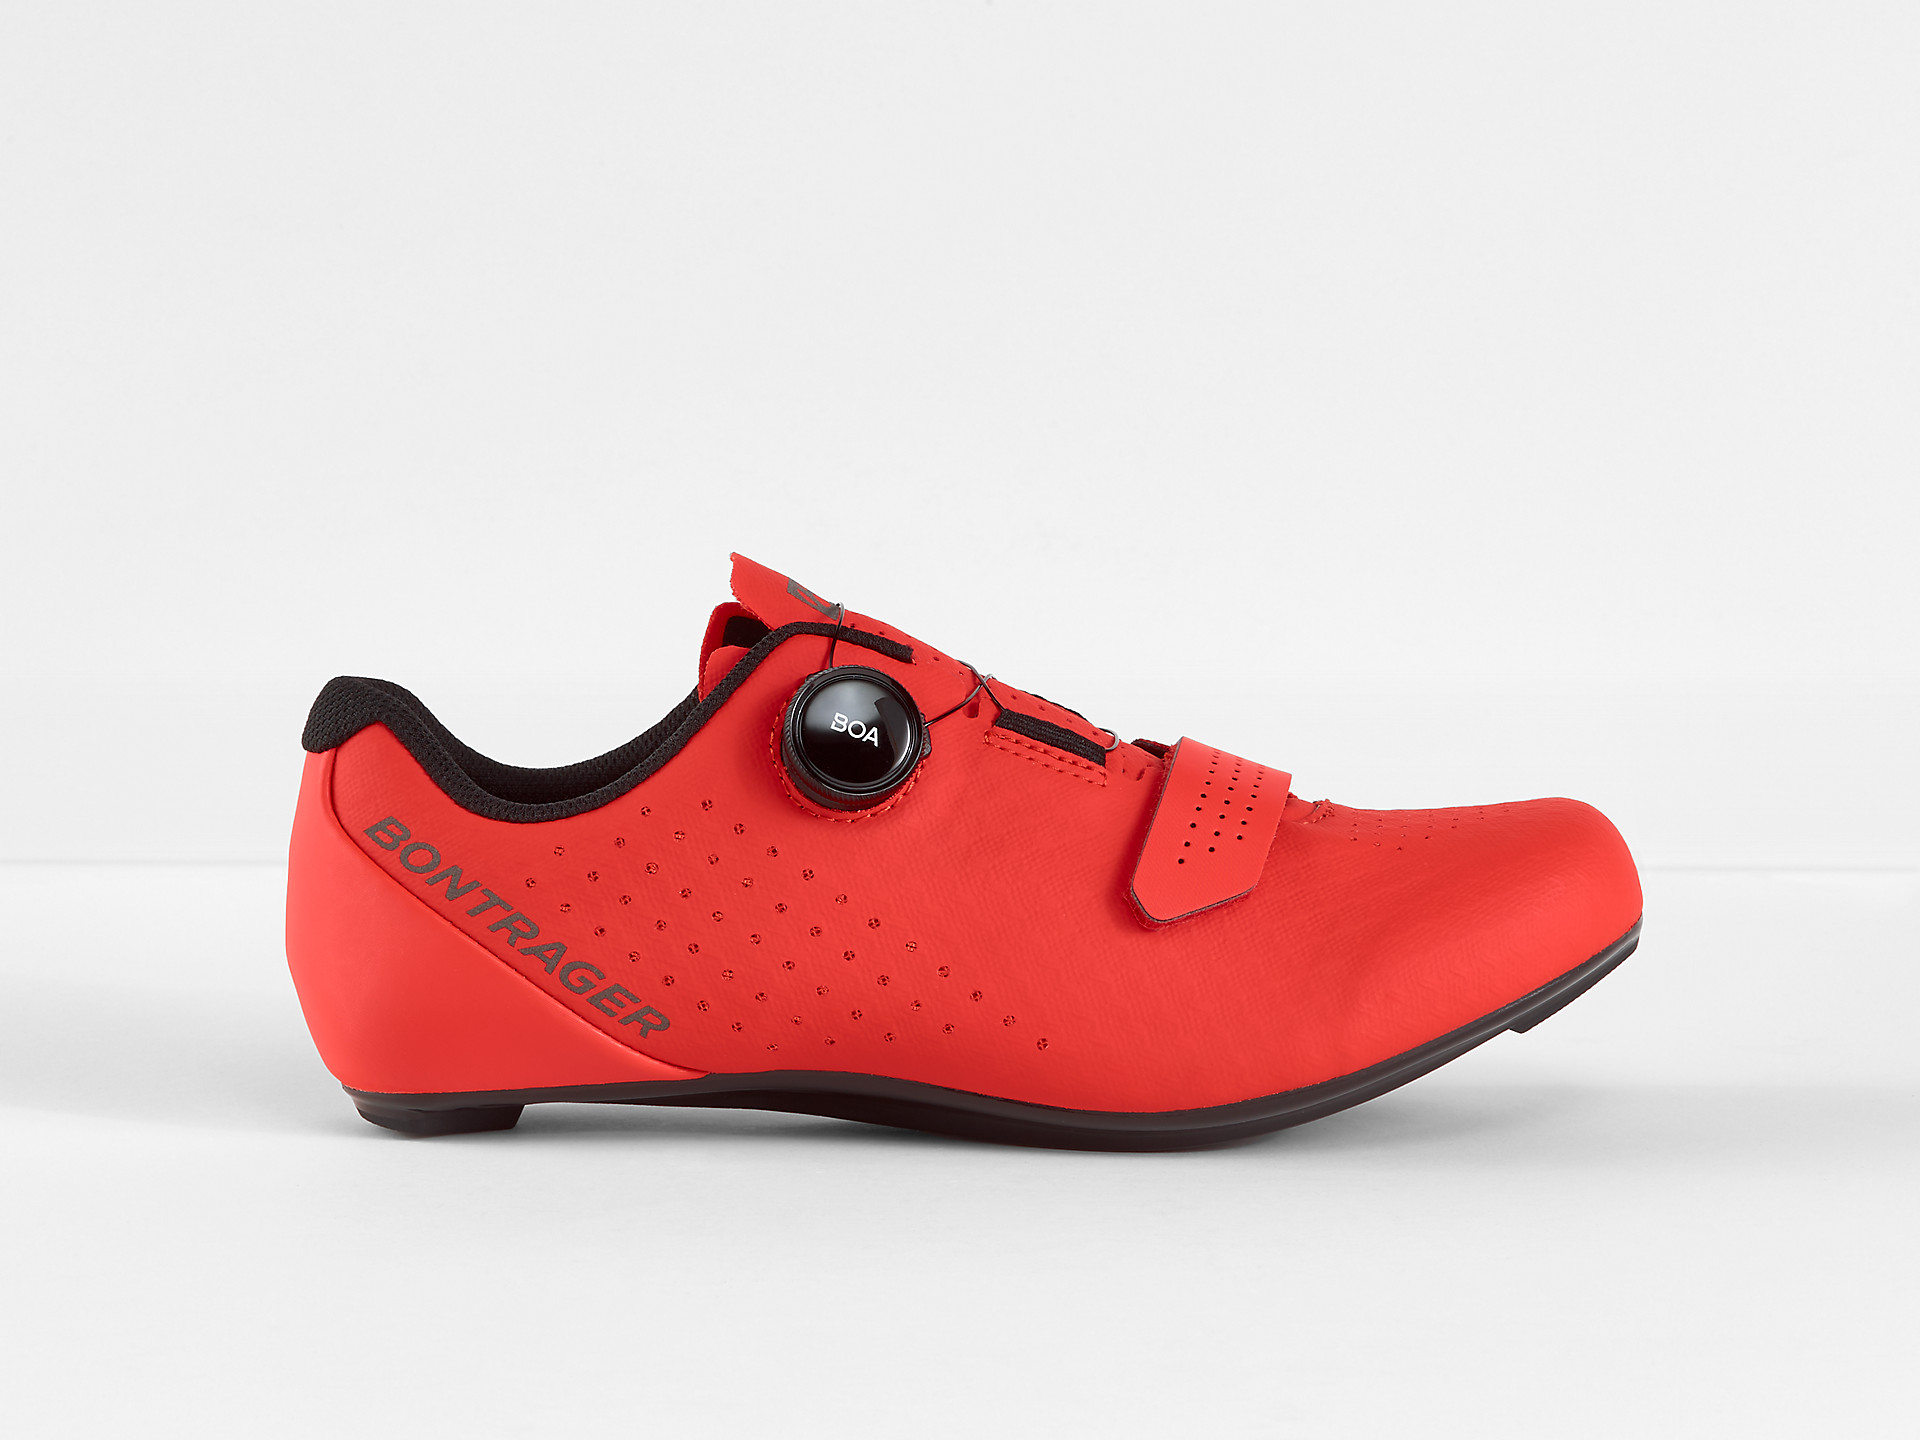 <a href="https://cycles-clement.be/product/chaussure-bont-circuit-race-48-red/">CHAUSSURE BONT CIRCUIT RACE 48 RED</a>